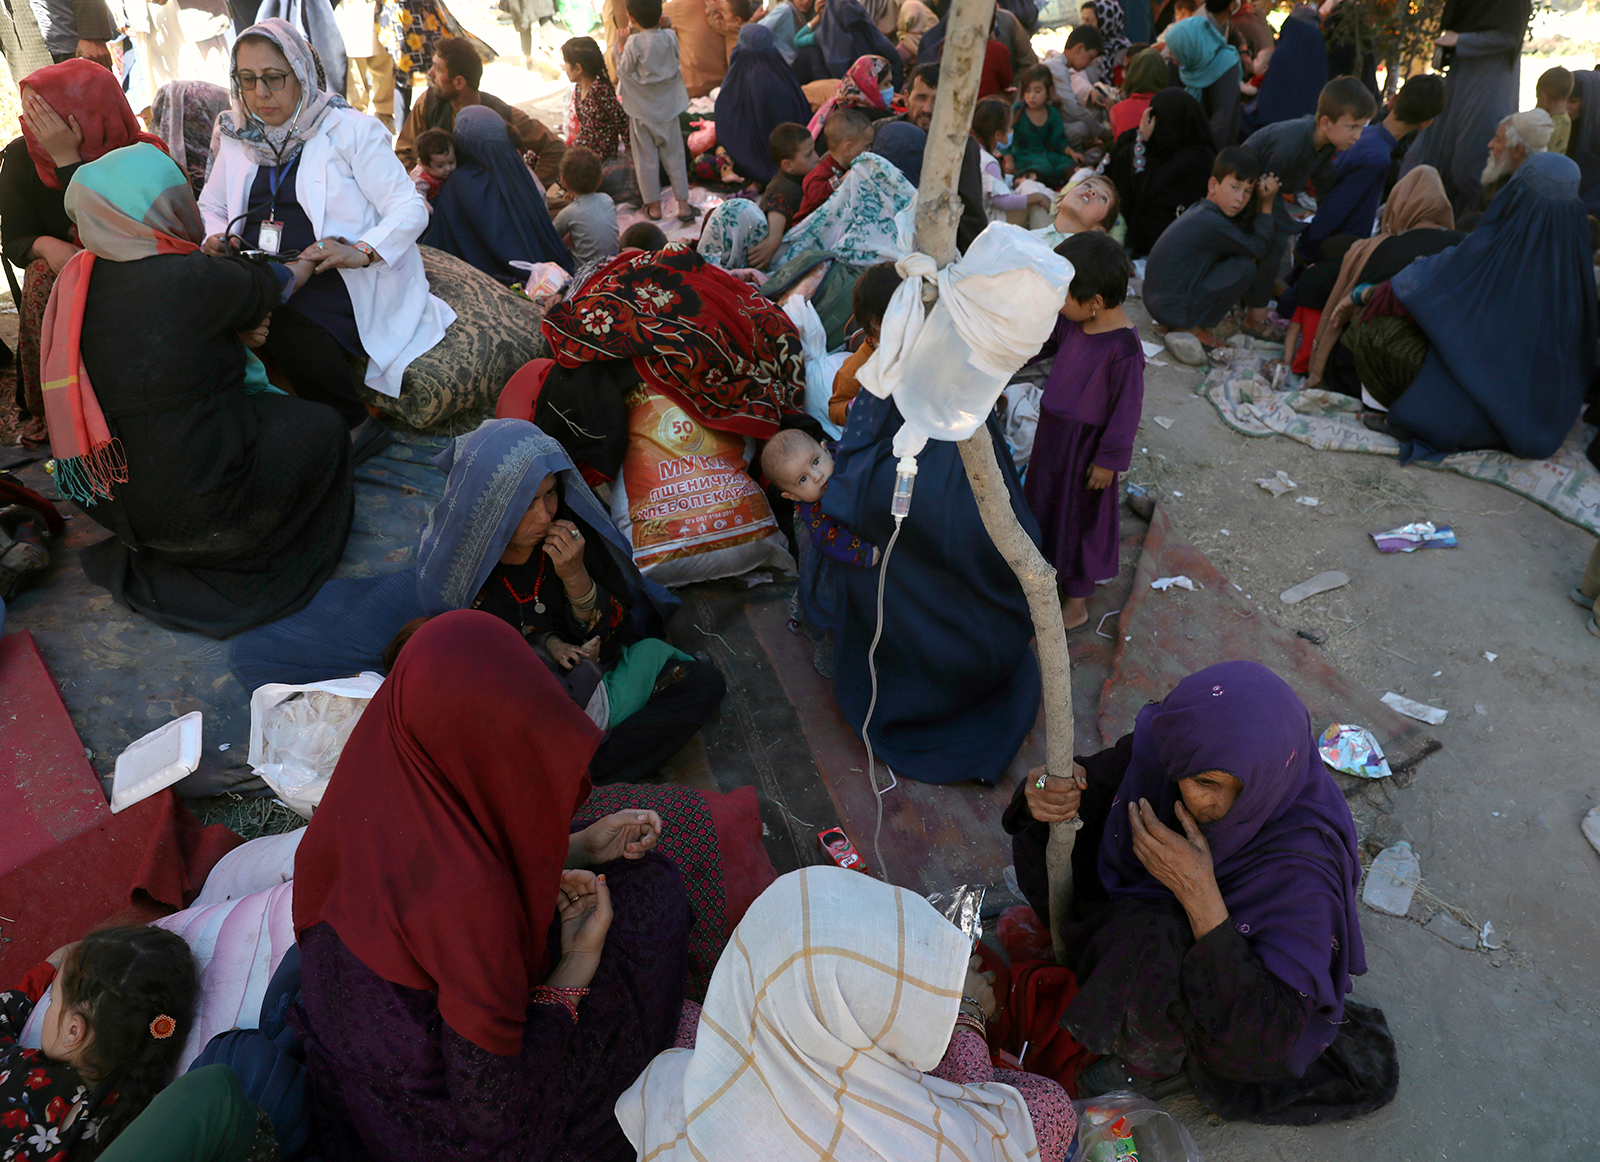 Internally displaced Afghan women from northern provinces, who fled their home due to fighting between the Taliban and Afghan security personnel, receive medical care in a public park in Kabul on August 10.